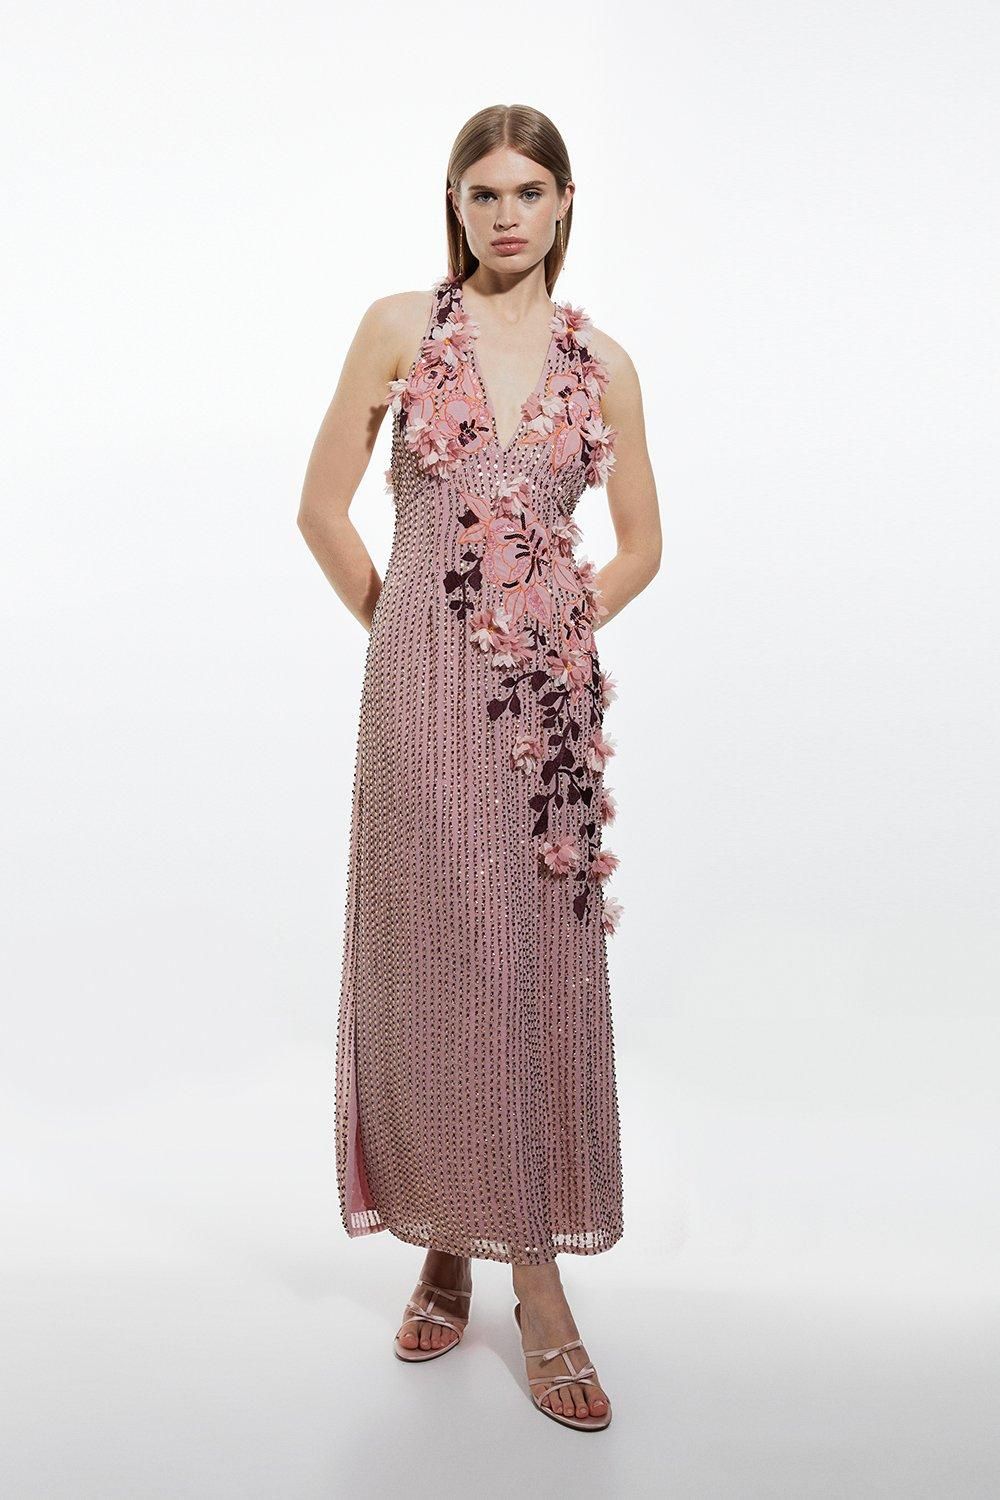 Crystal Embellished Embroidery And Applique Woven Halter Woven Maxi Dress | Karen Millen US